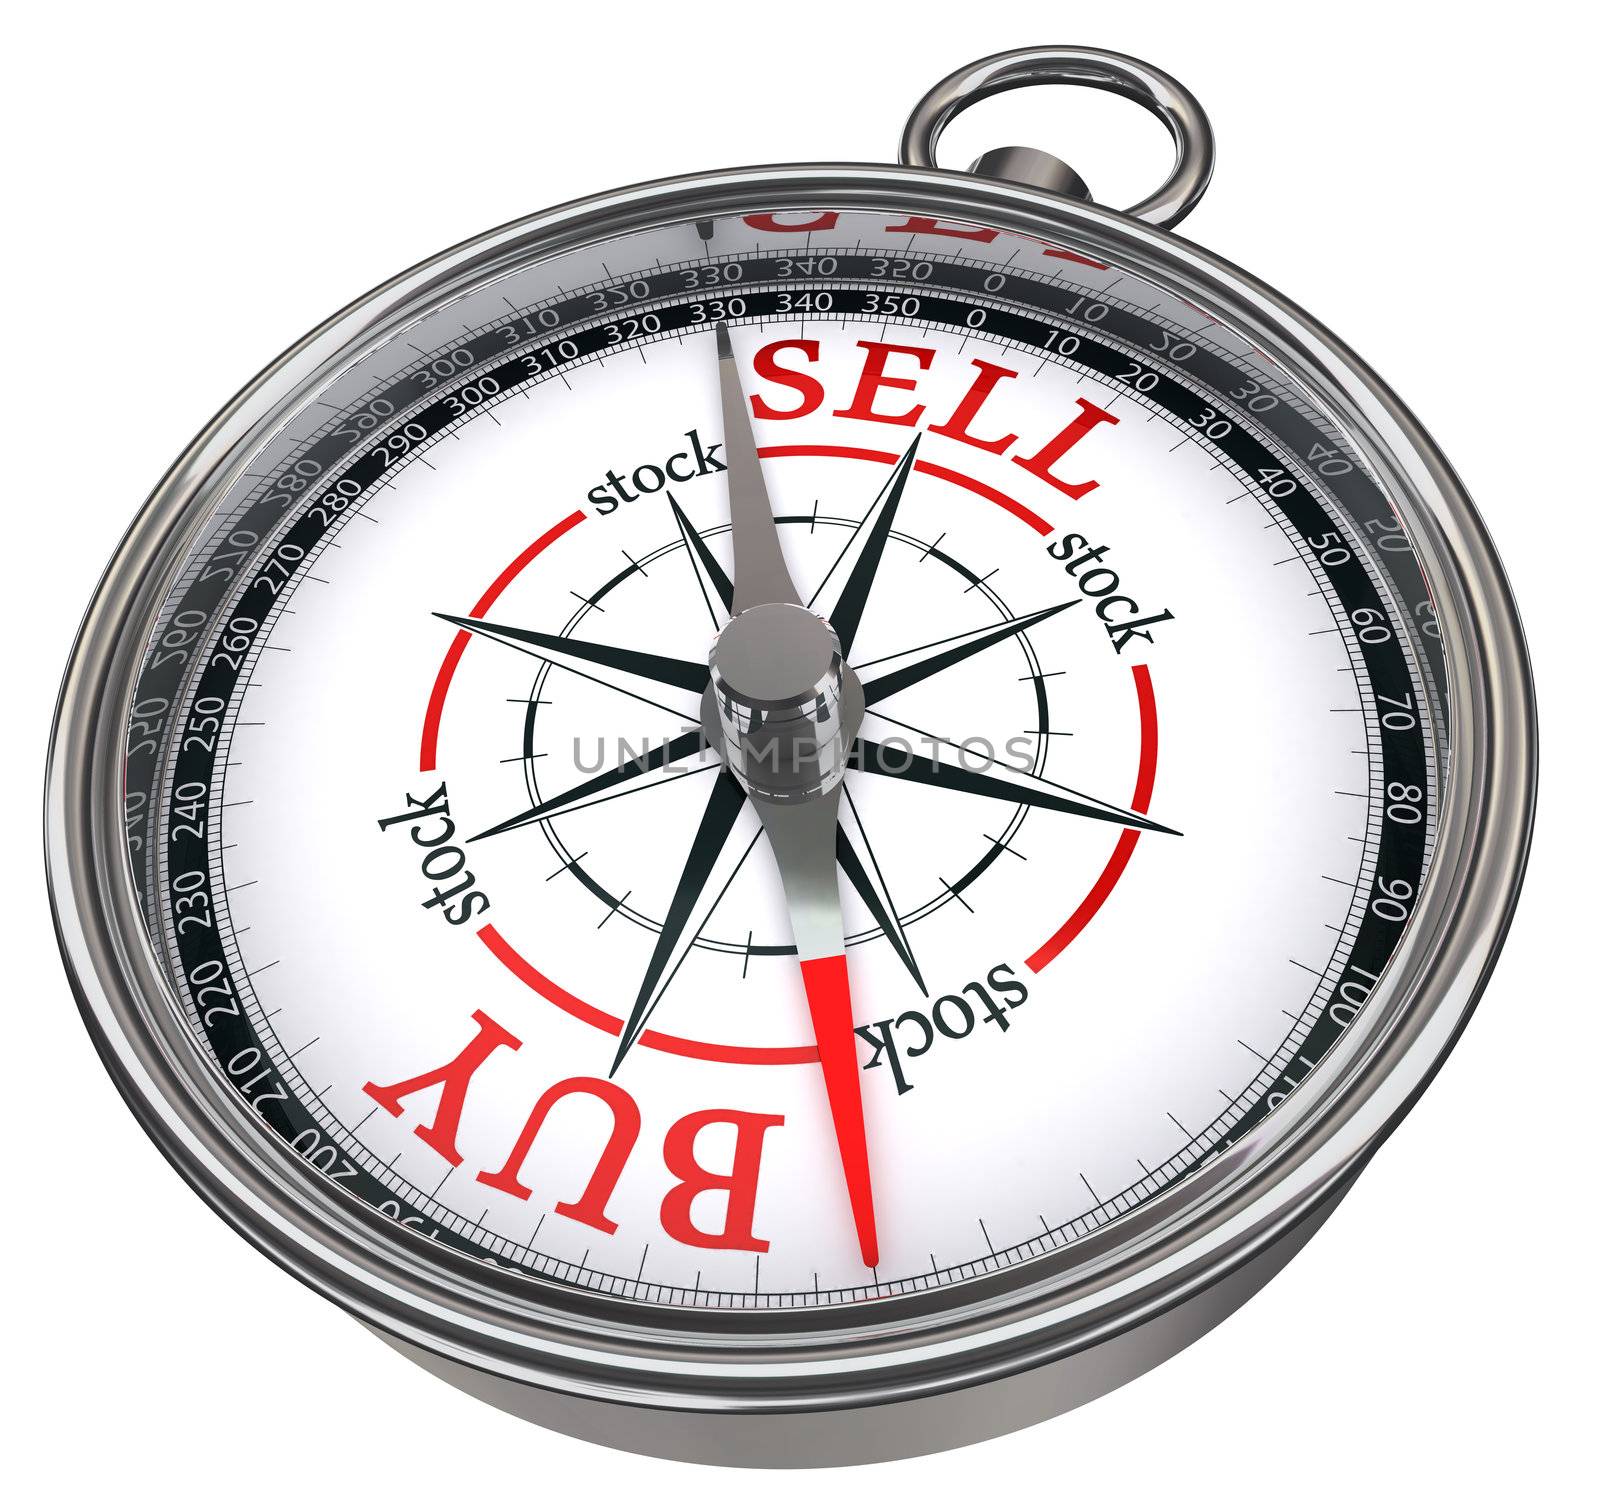 buy vs sell business concept compass isolated on white background